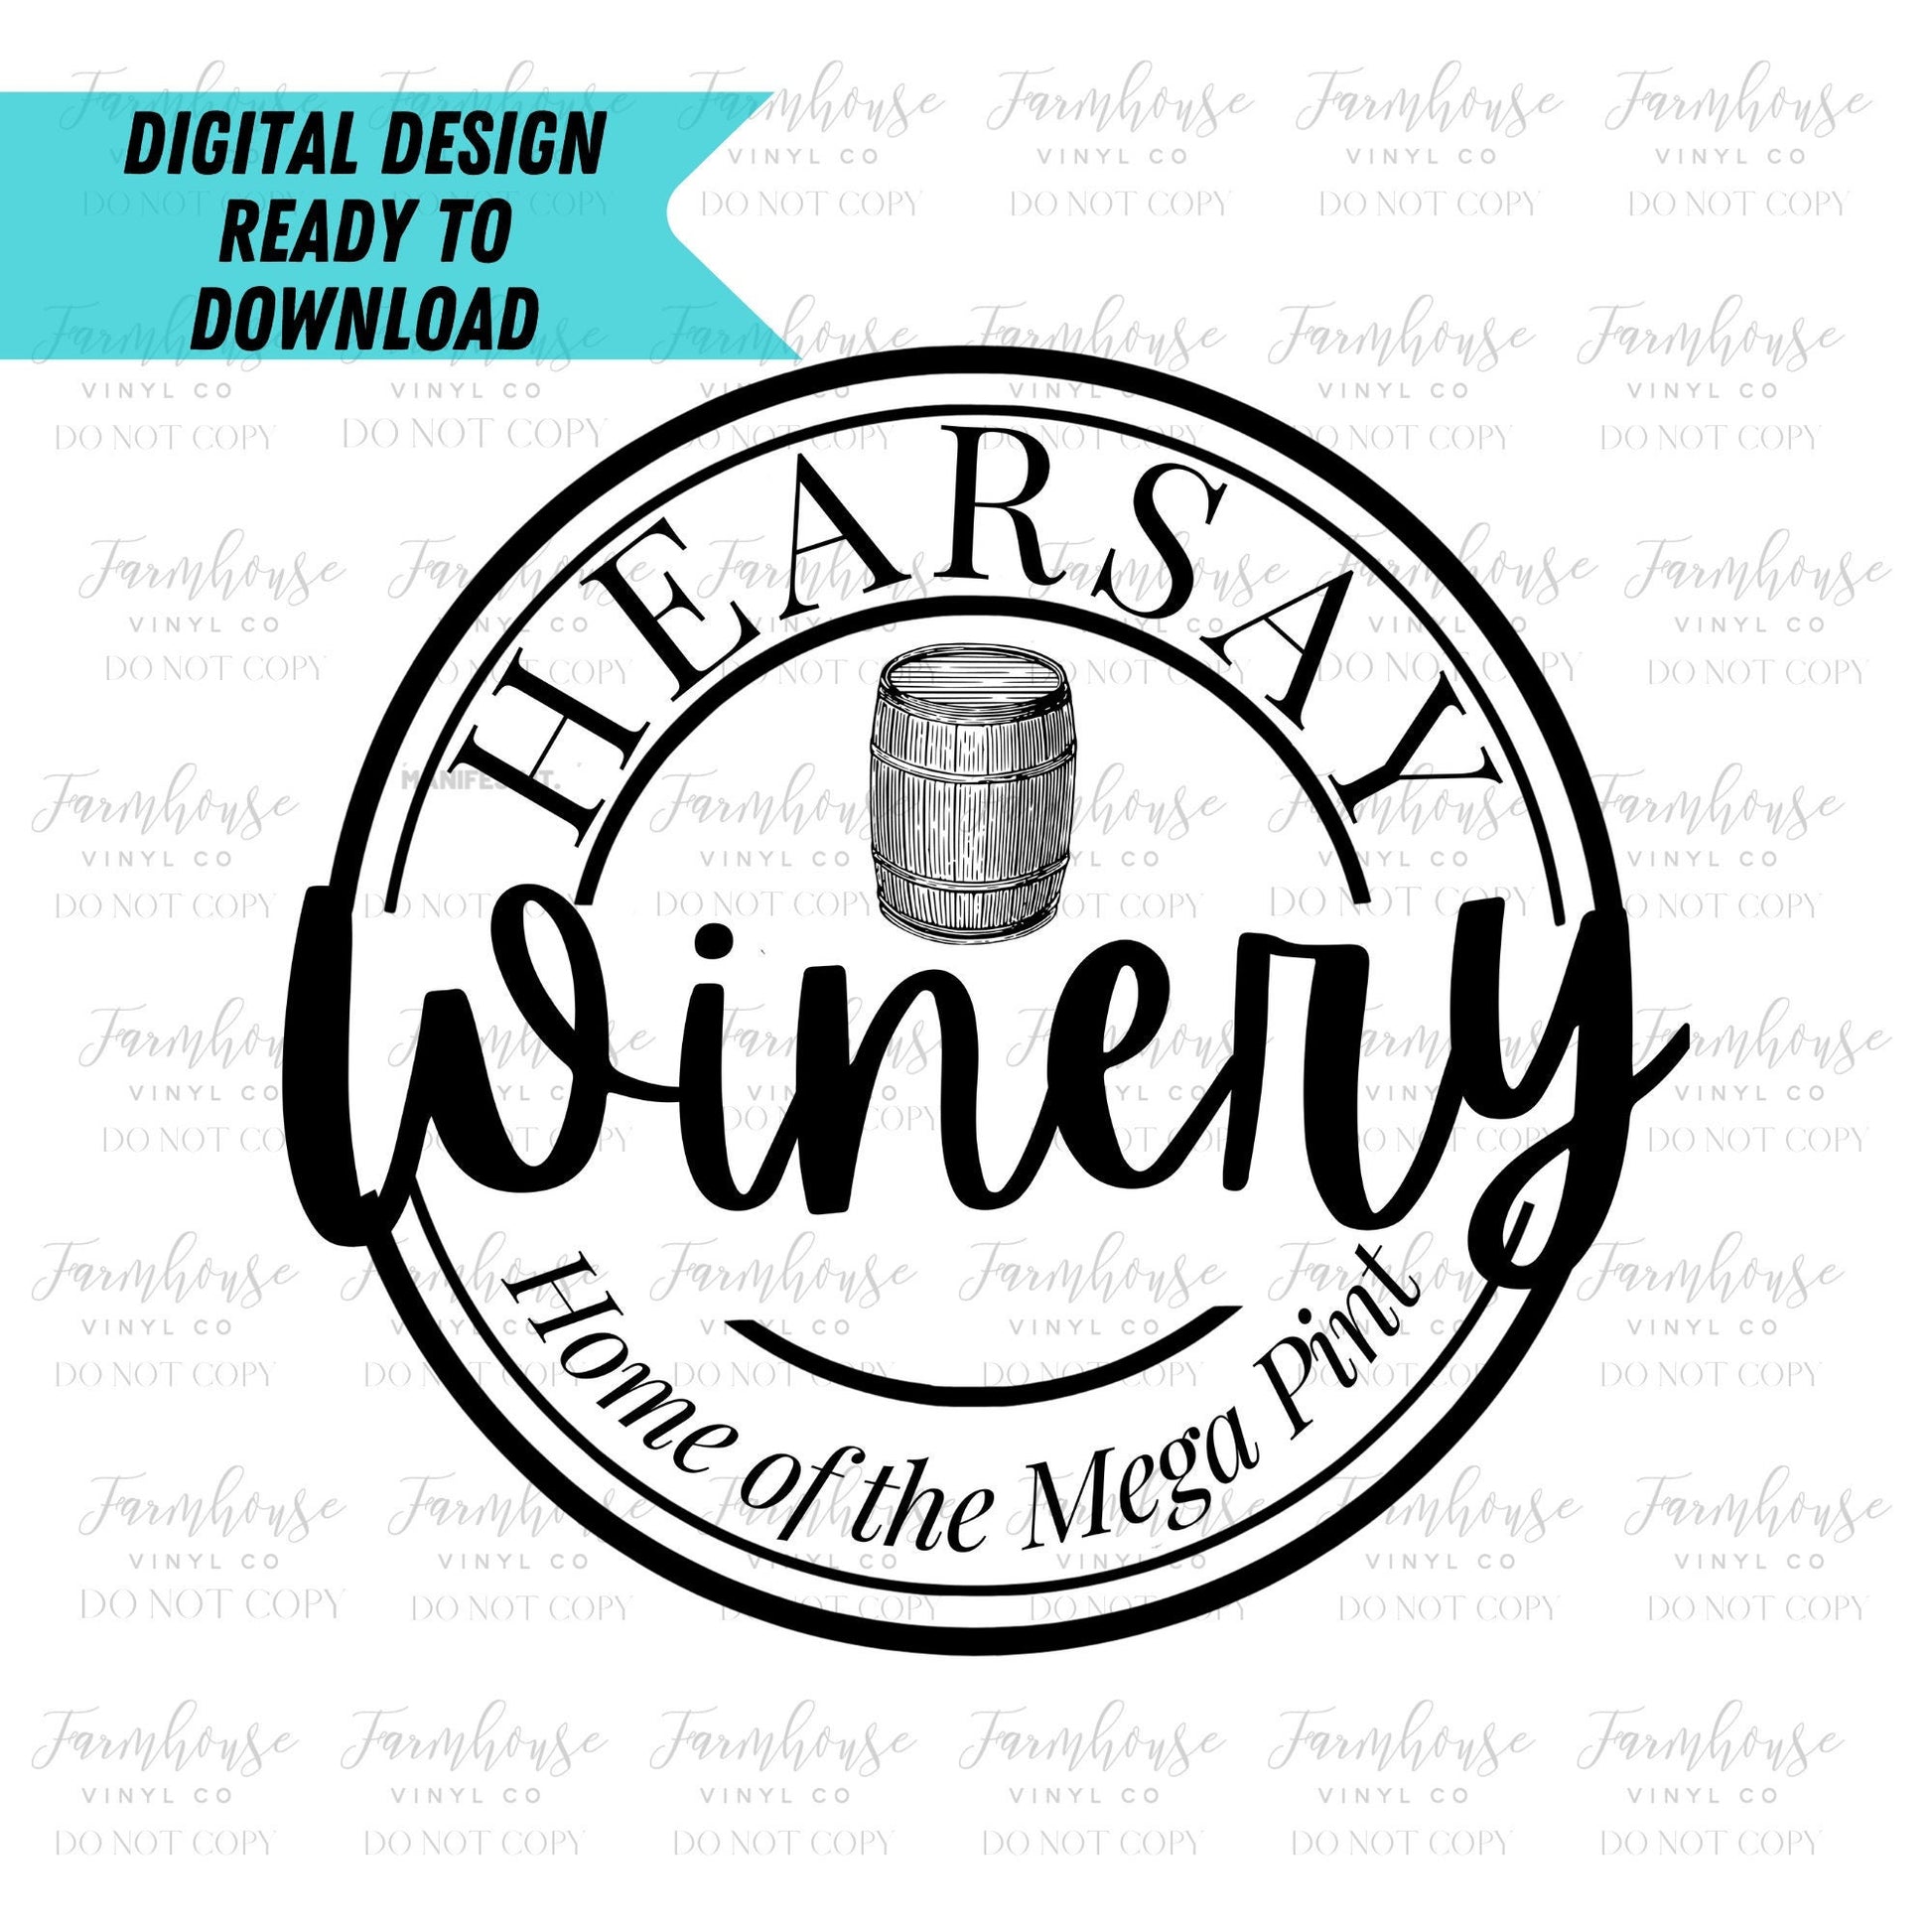 Hearsay Winery Home of the Mega Pint, Happy Hour Anytime PNG, Mega Pint SVG, Digital Download, Sublimation Design Download, Hearsay Winery - Farmhouse Vinyl Co